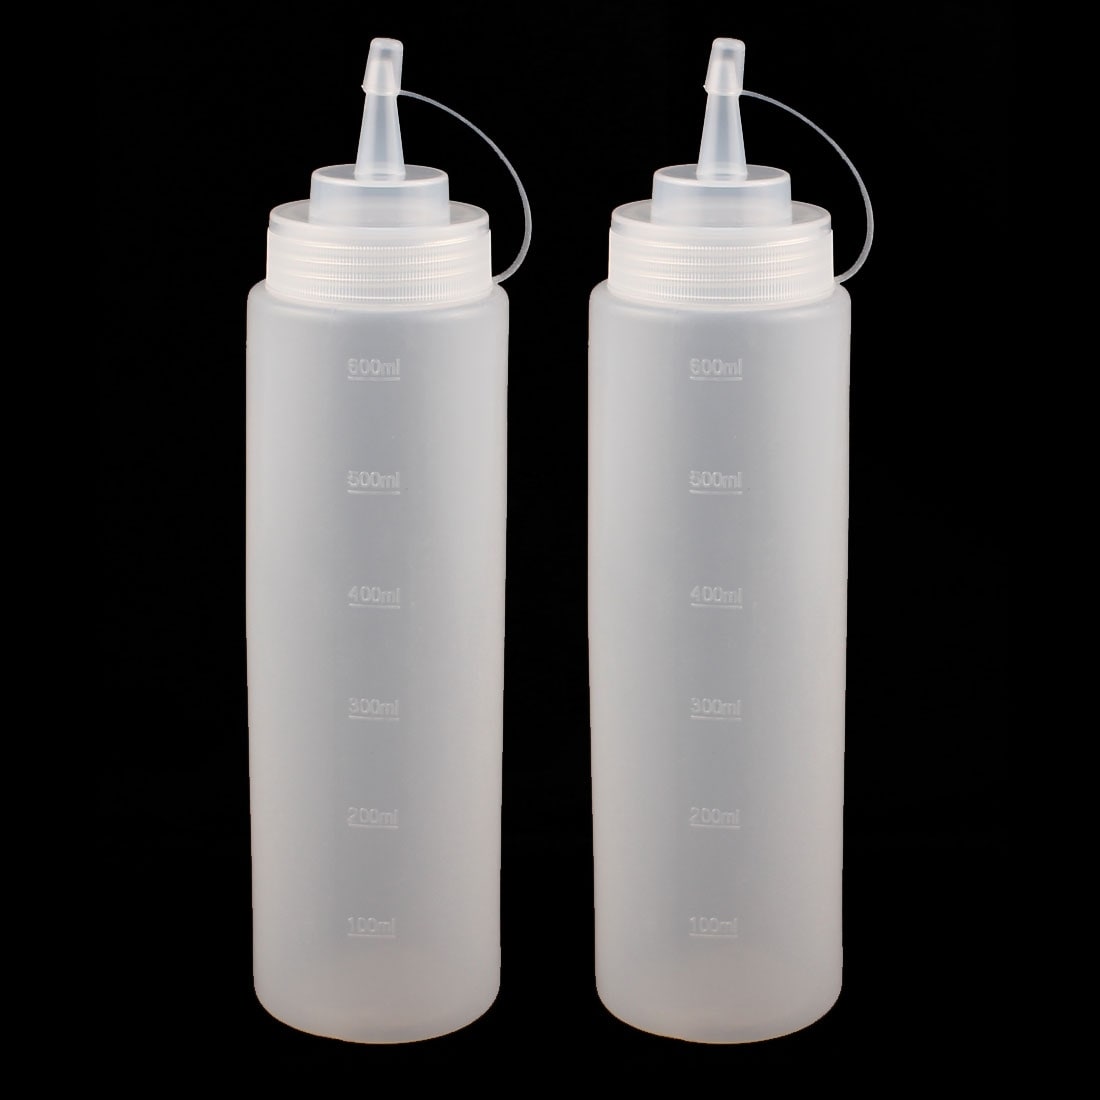 https://ak1.ostkcdn.com/images/products/is/images/direct/07e2532a32bbbdfa7f4666513ca9019f7ffb40a5/2Pcs-600ml-Clear-Plastic-Squeeze-Bottles-Condiment-Ketchup-Mustard-Oil-Salt.jpg